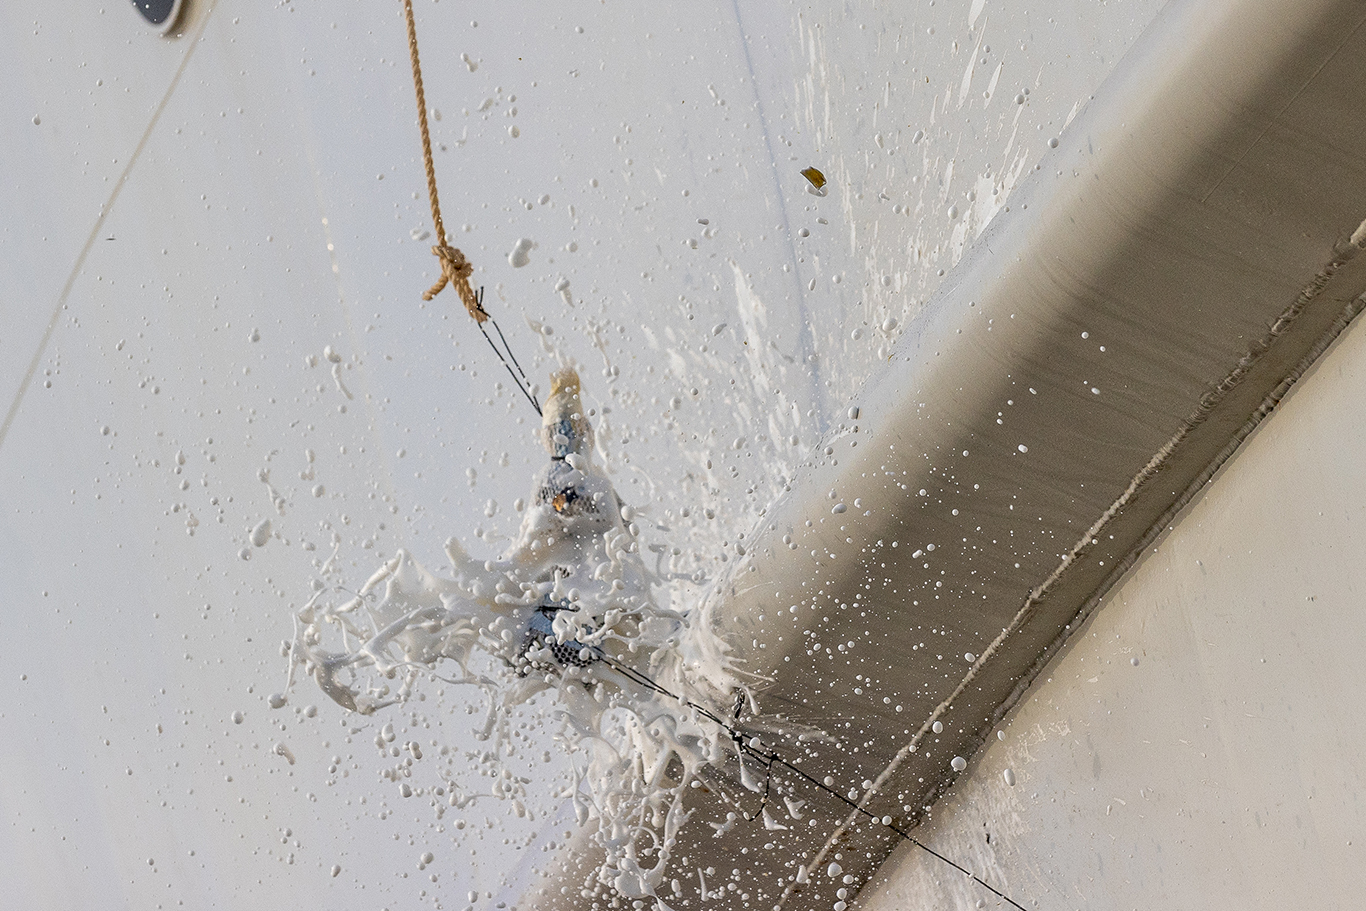 A bottle smashes against Silver Origin’s hull during the naming ceremony